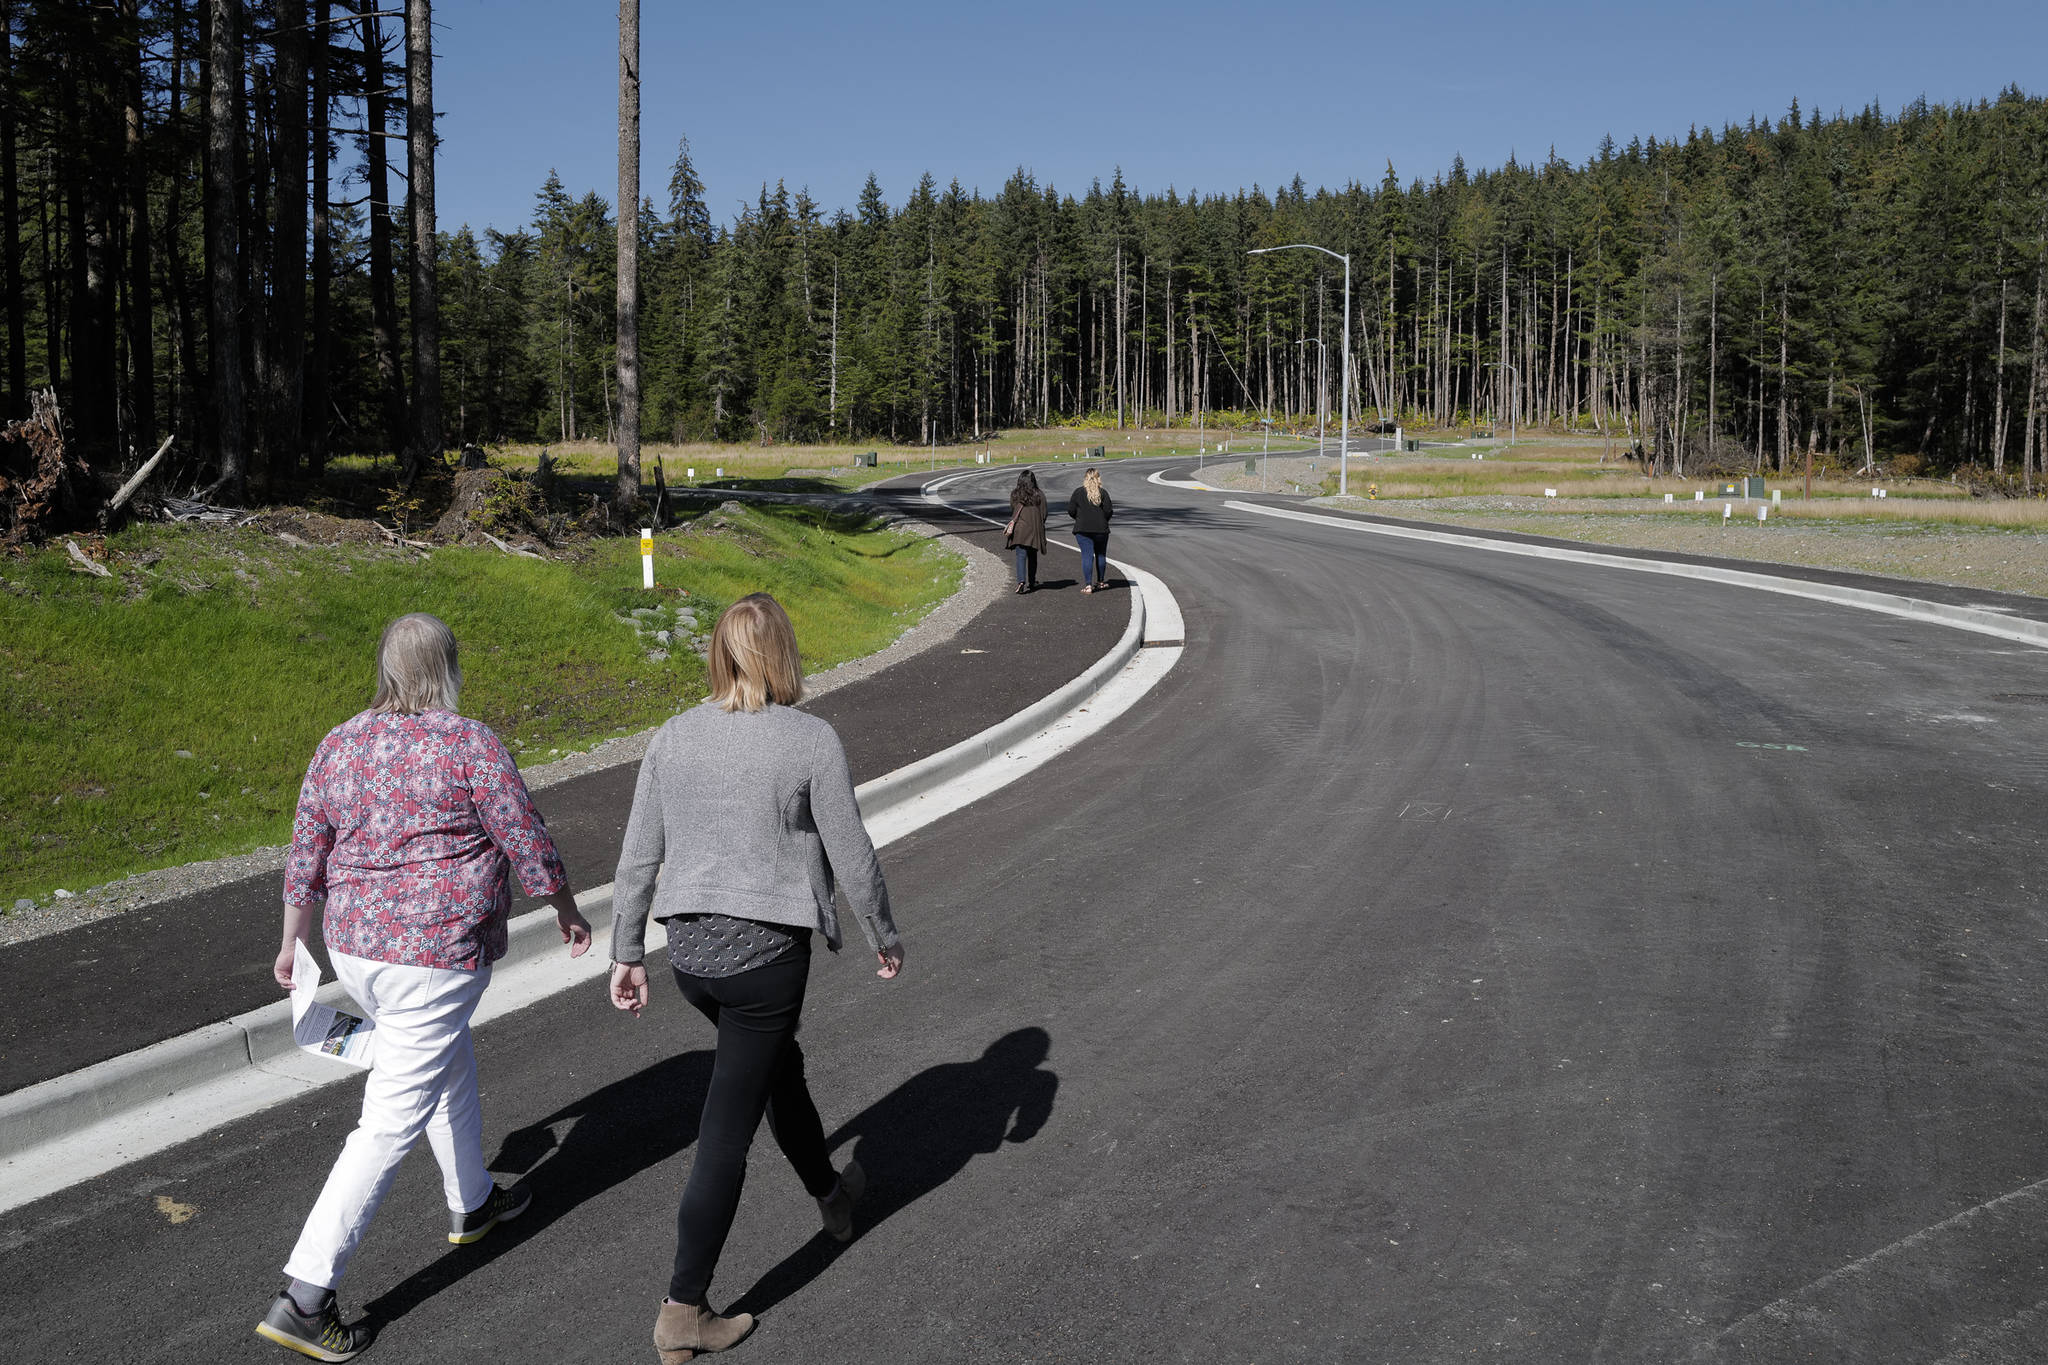 In this file photo, Mayor Beth Weldon and Assembly Member Carole Triem take a stroll on Karl Reishus Boulevard after a ribbon-cutting ceremony to commemorate the near completion of the Pederson Hill Subdivision on Friday, Sept. 6, 2019. Reishus was a Juneau Police Department officer who died in 1992 when he fell from a 40-foot tower during a training exercise. (Michael Penn | Juneau Empire FIle)